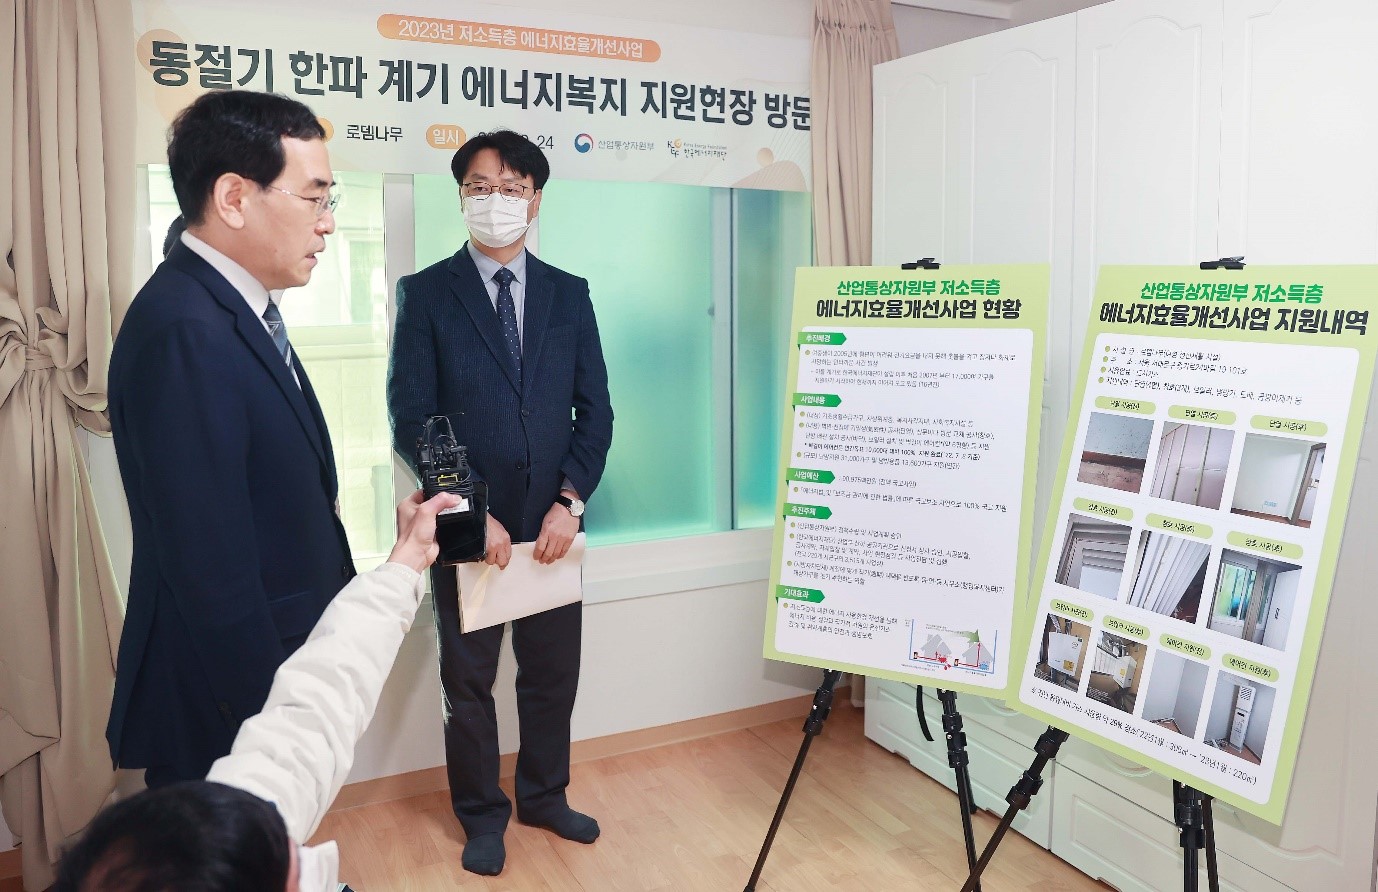 Minister visits social welfare institution to check winter energy efficiency challenges